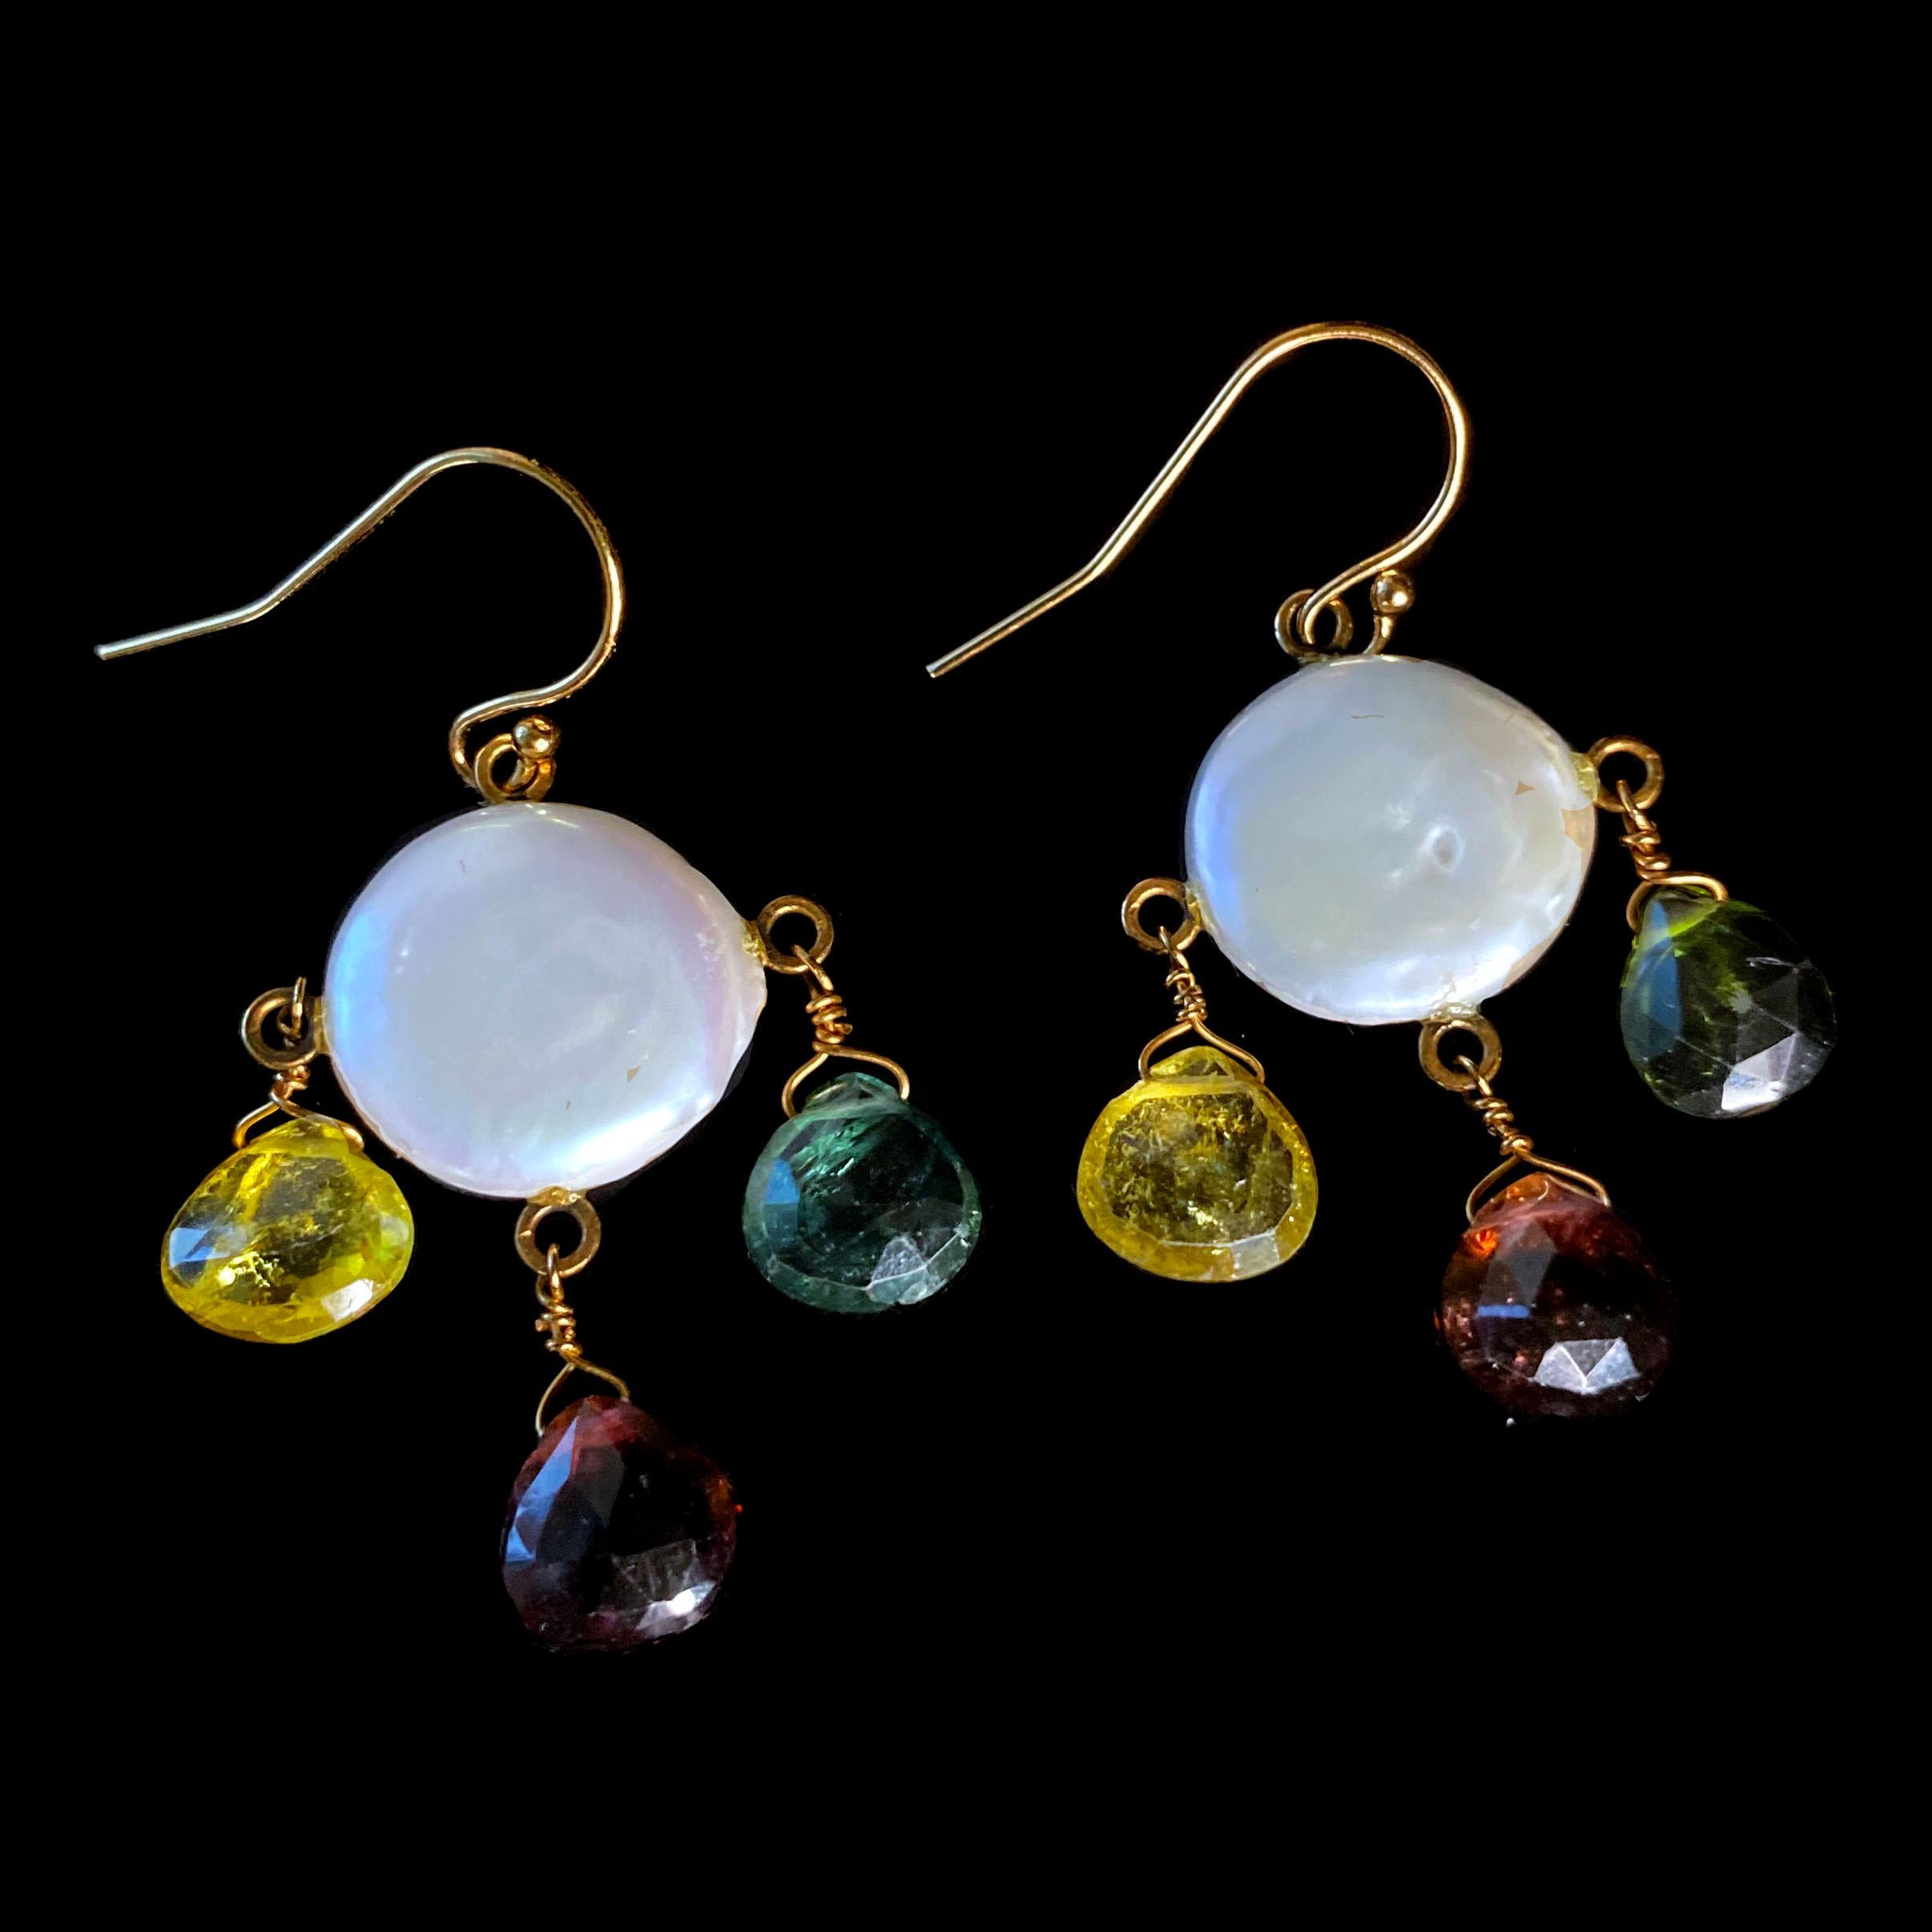 Beautiful pair of Chandelier Earrings by Marina J. This One of a Kind pair feature multi colored Tourmaline in a faceted Teardrop Briolette cut. The Tourmaline illuminate with radiant color when hit with light due to their translucent nature. The